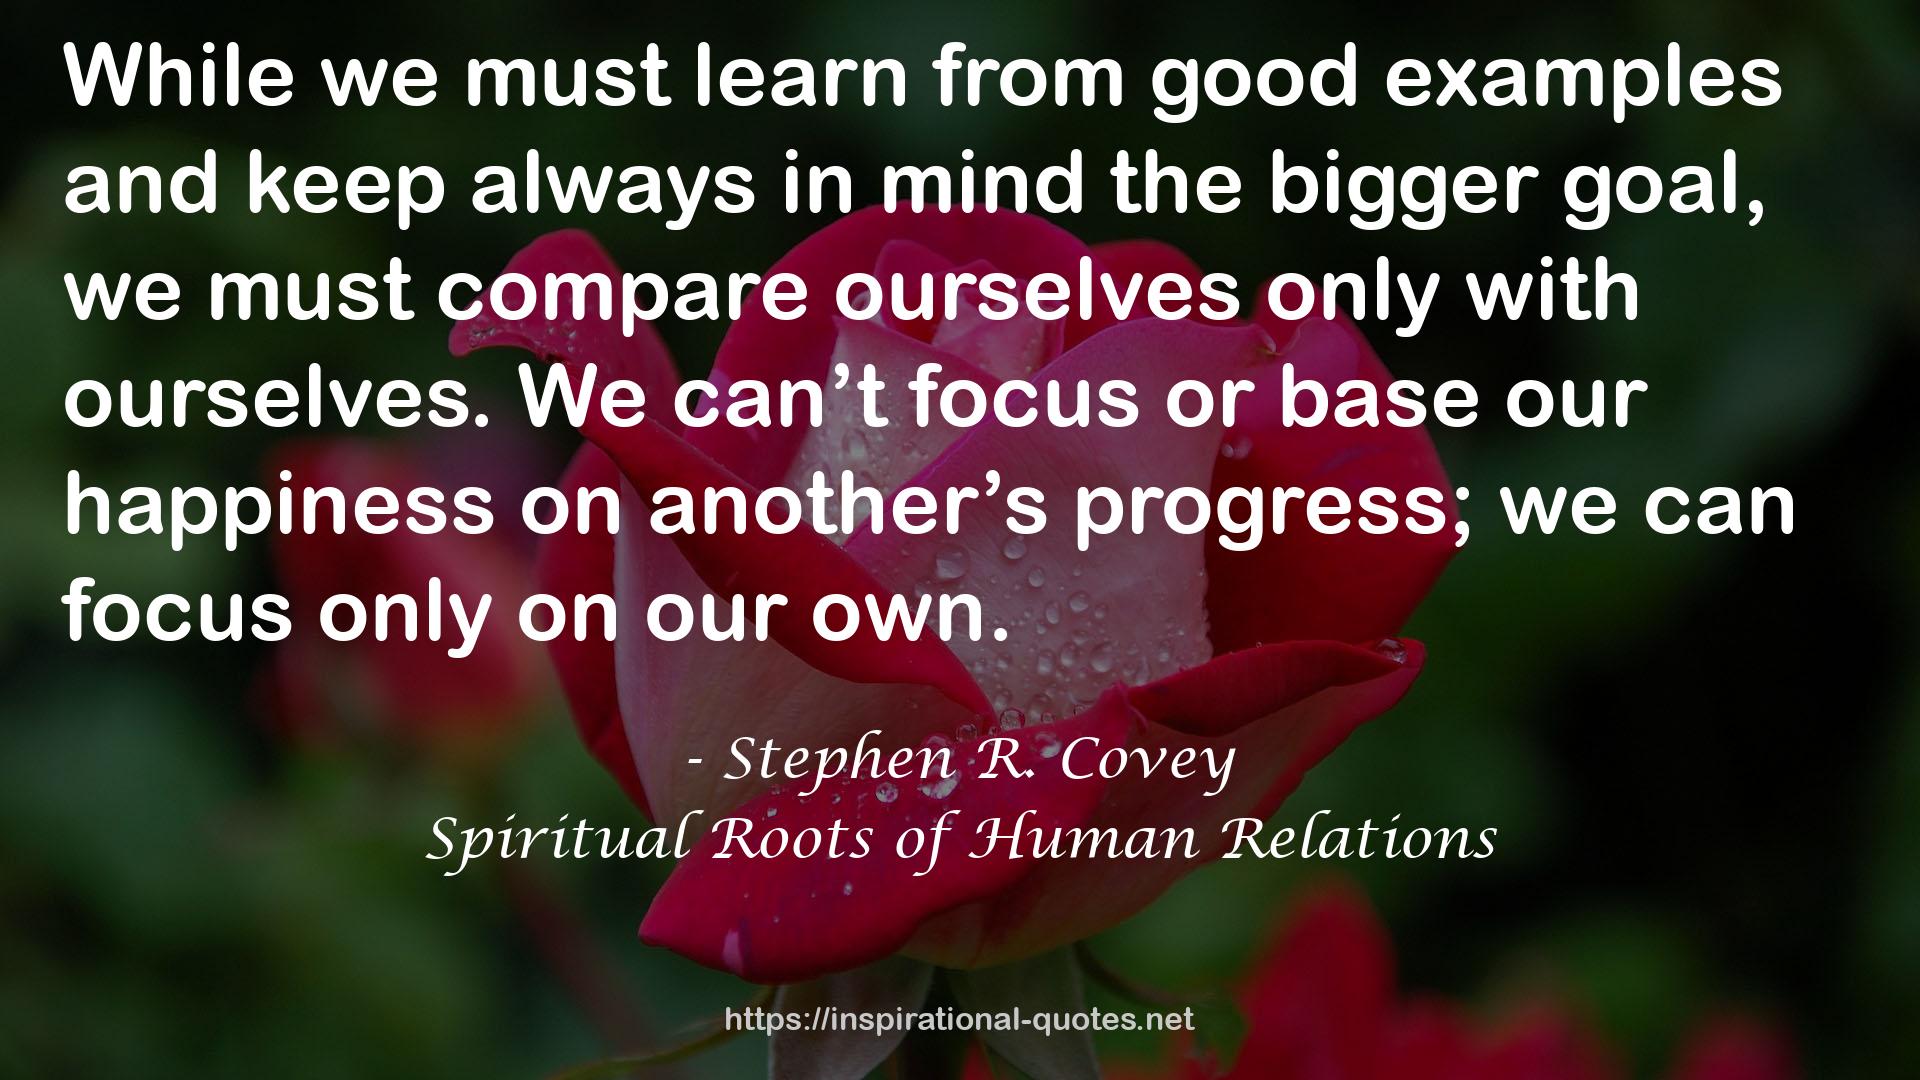 Spiritual Roots of Human Relations QUOTES